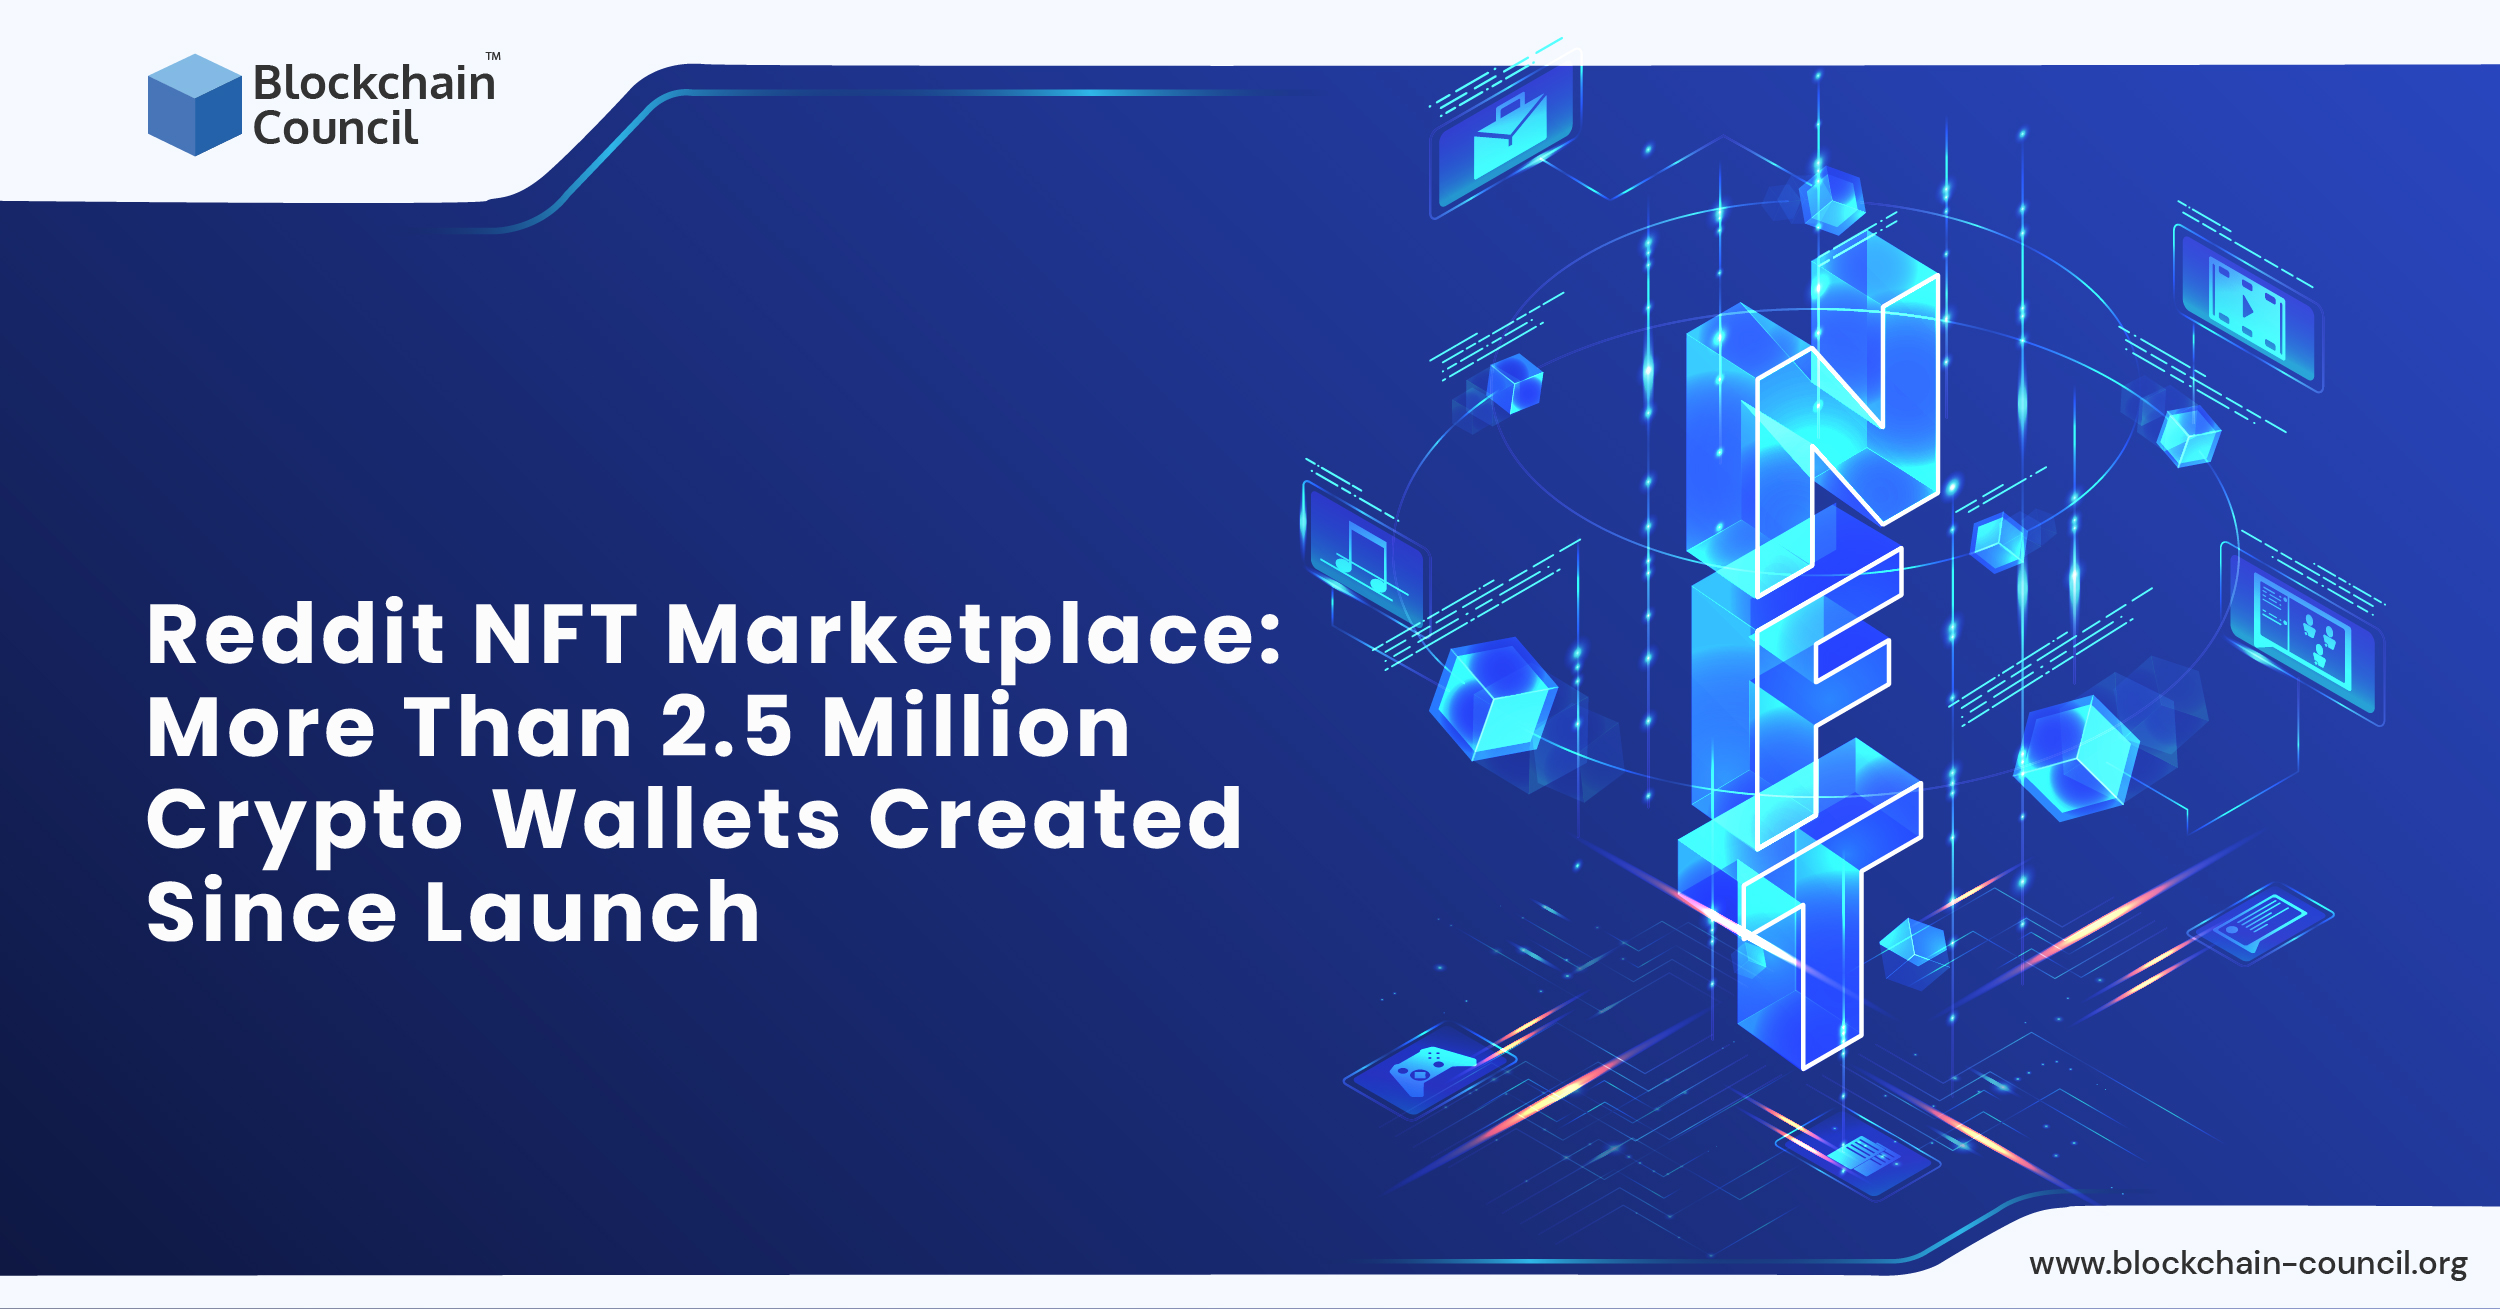 Reddit NFT Marketplace: More Than 2.5 Million Crypto Wallets Created Since Launch